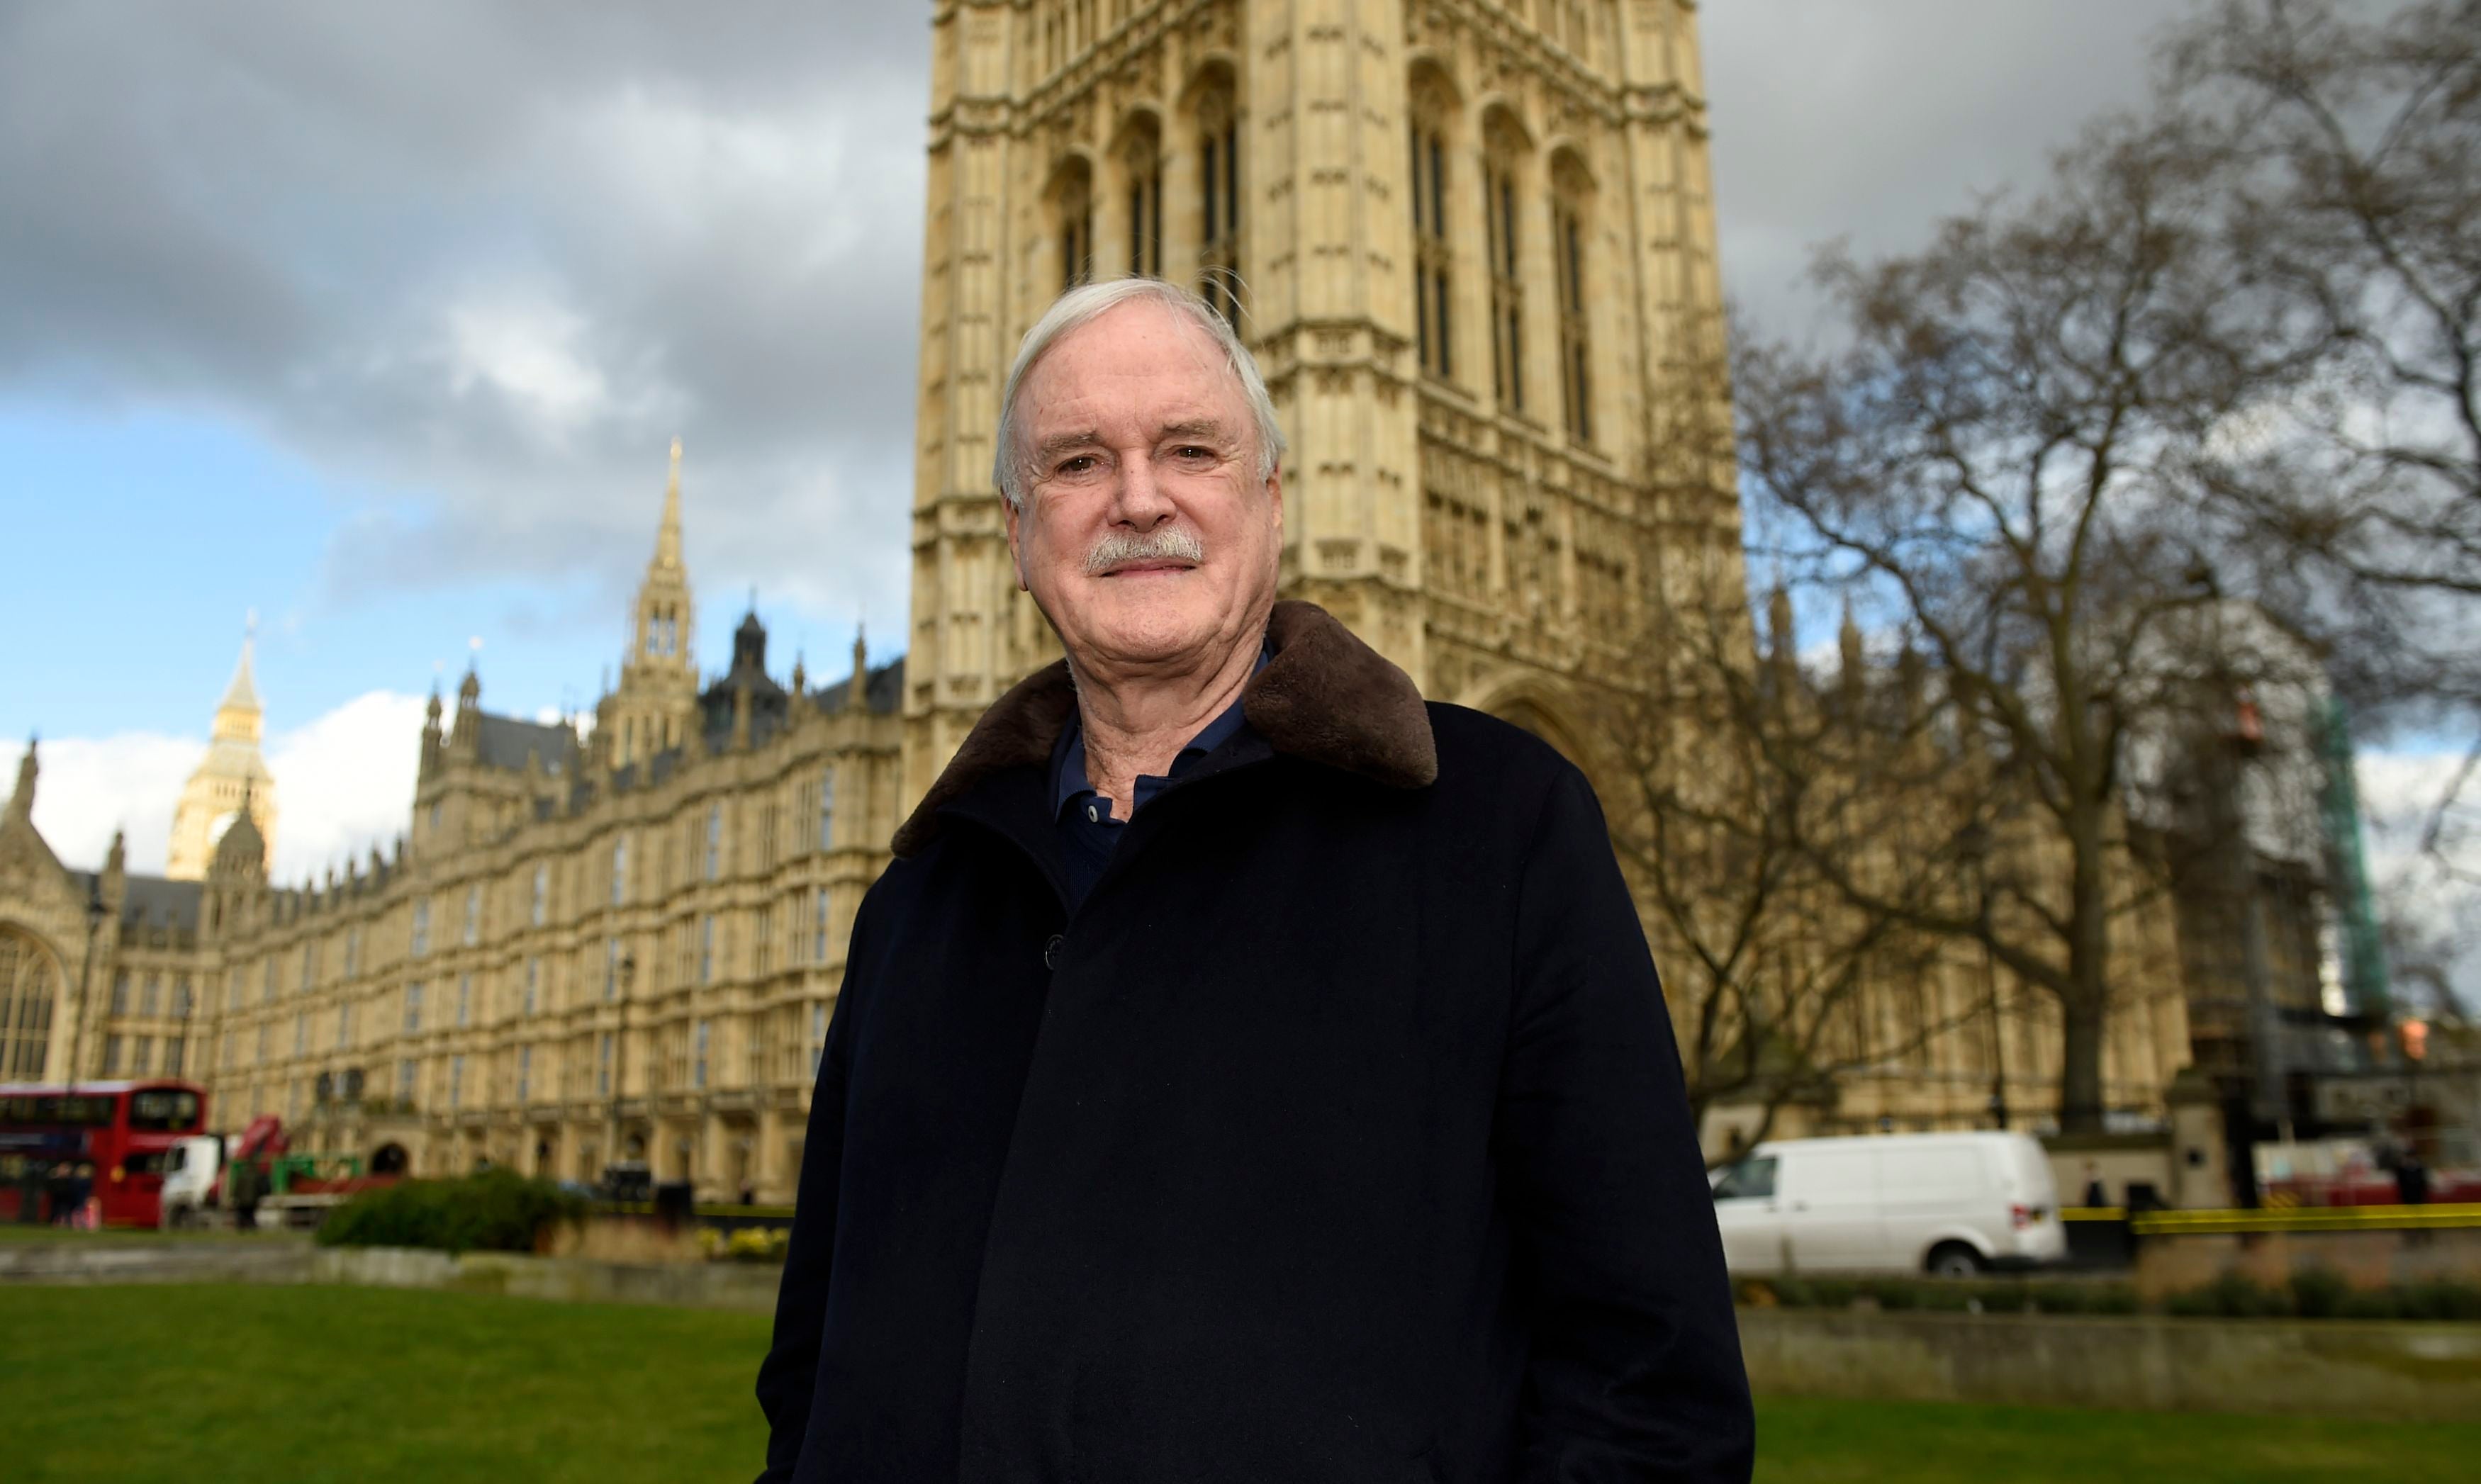 Cleese will soon host his own show on GB News